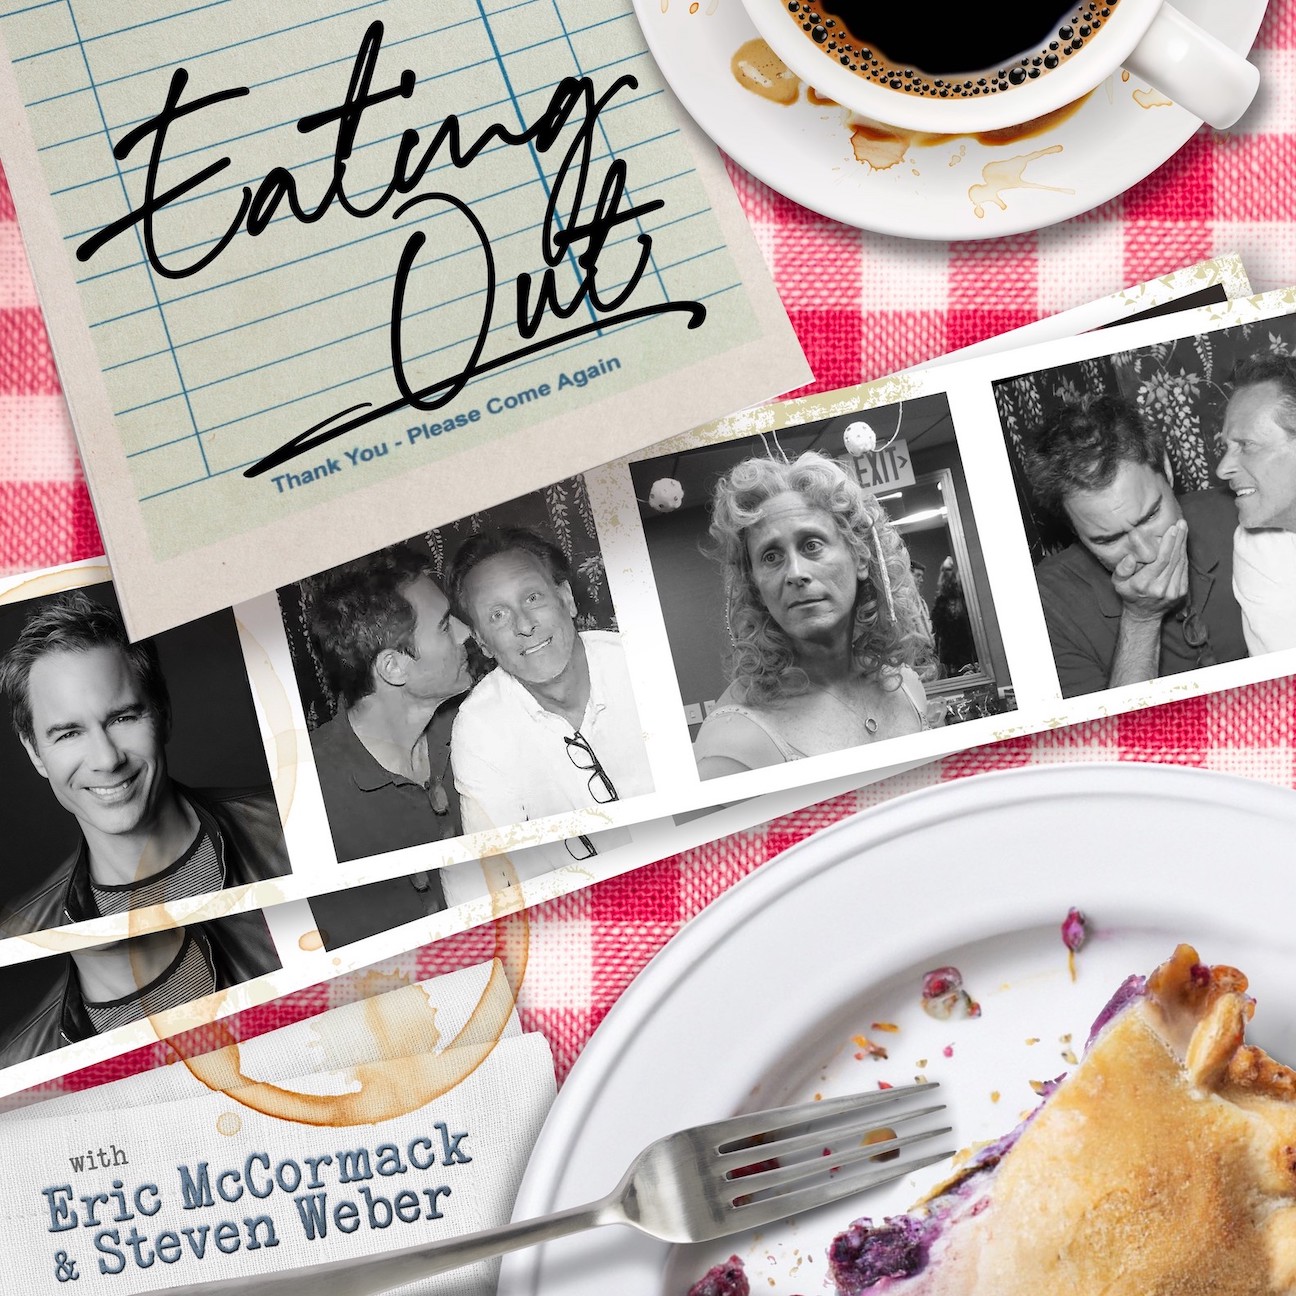 `Eating Out with Eric & Steve` graphic courtesy of Lippin Group